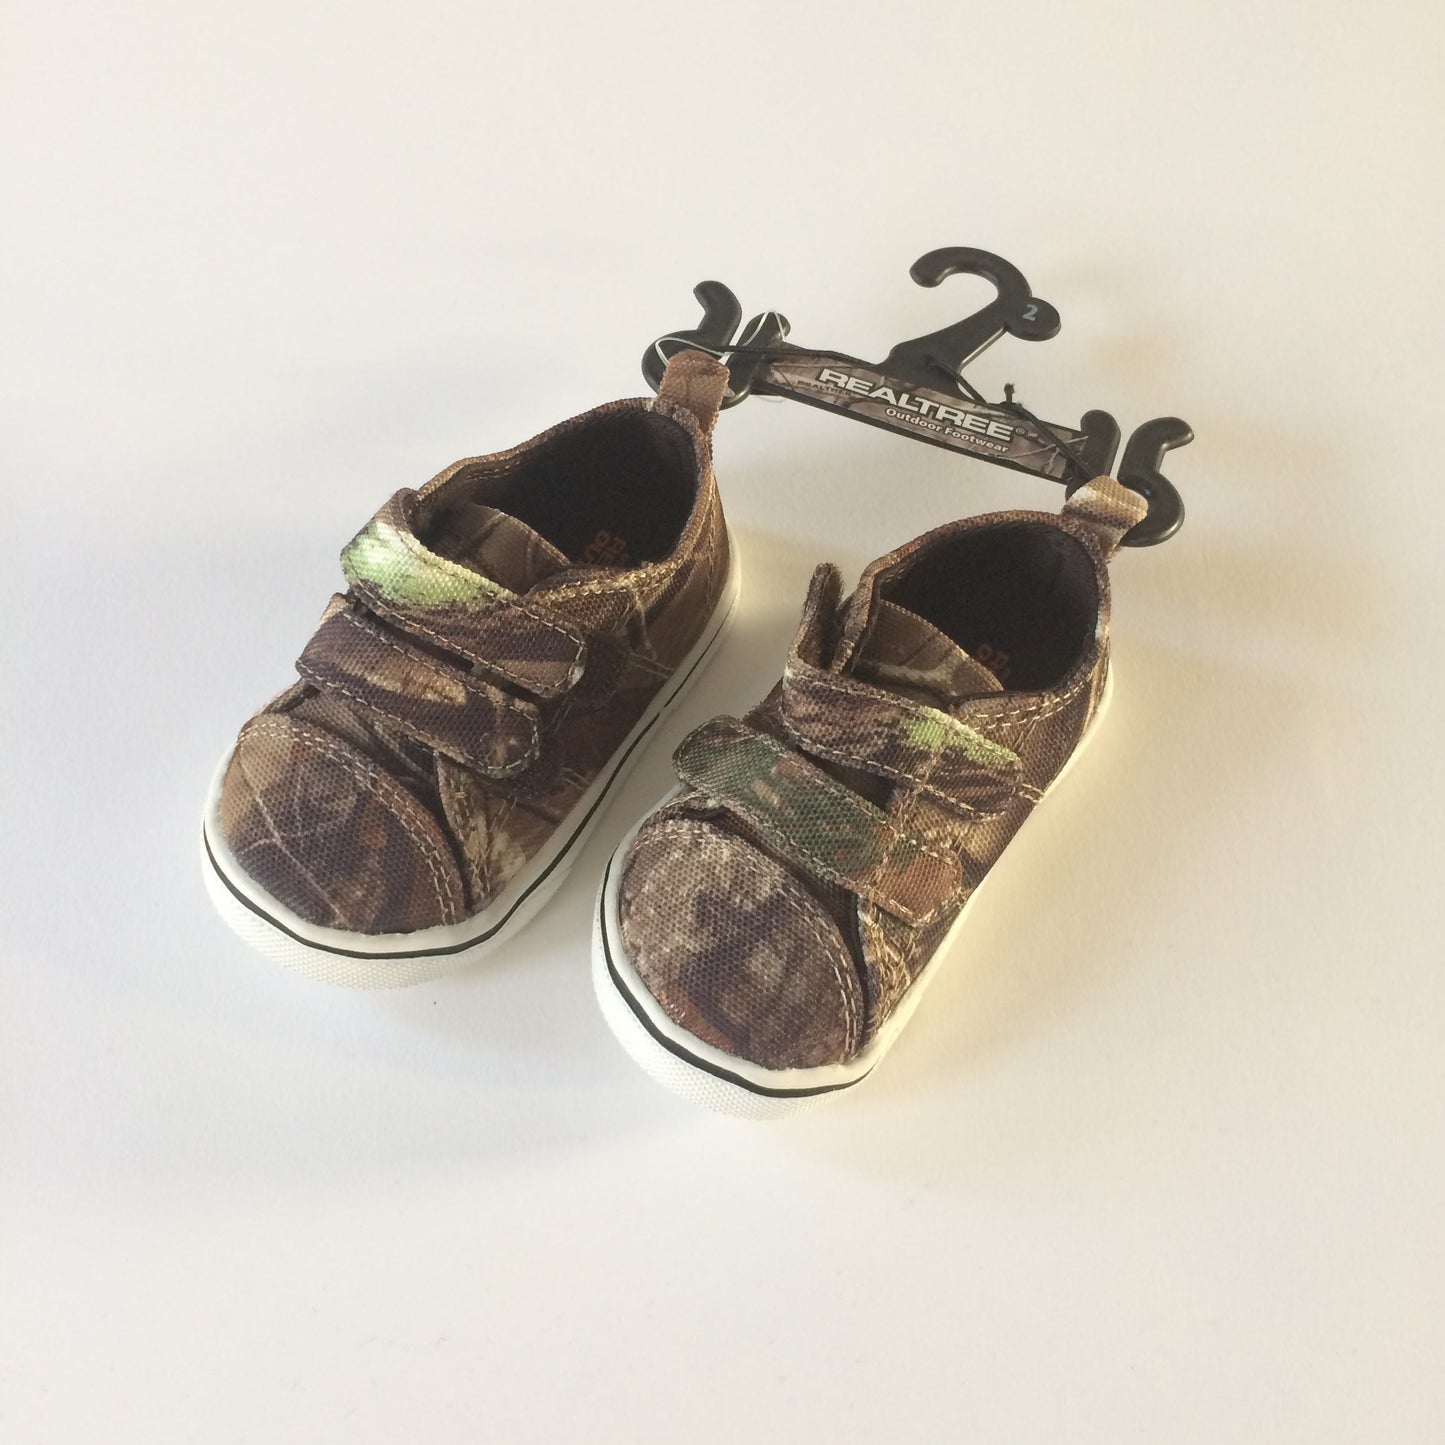 Realtree Camouflage Print Sneakers Size 2 